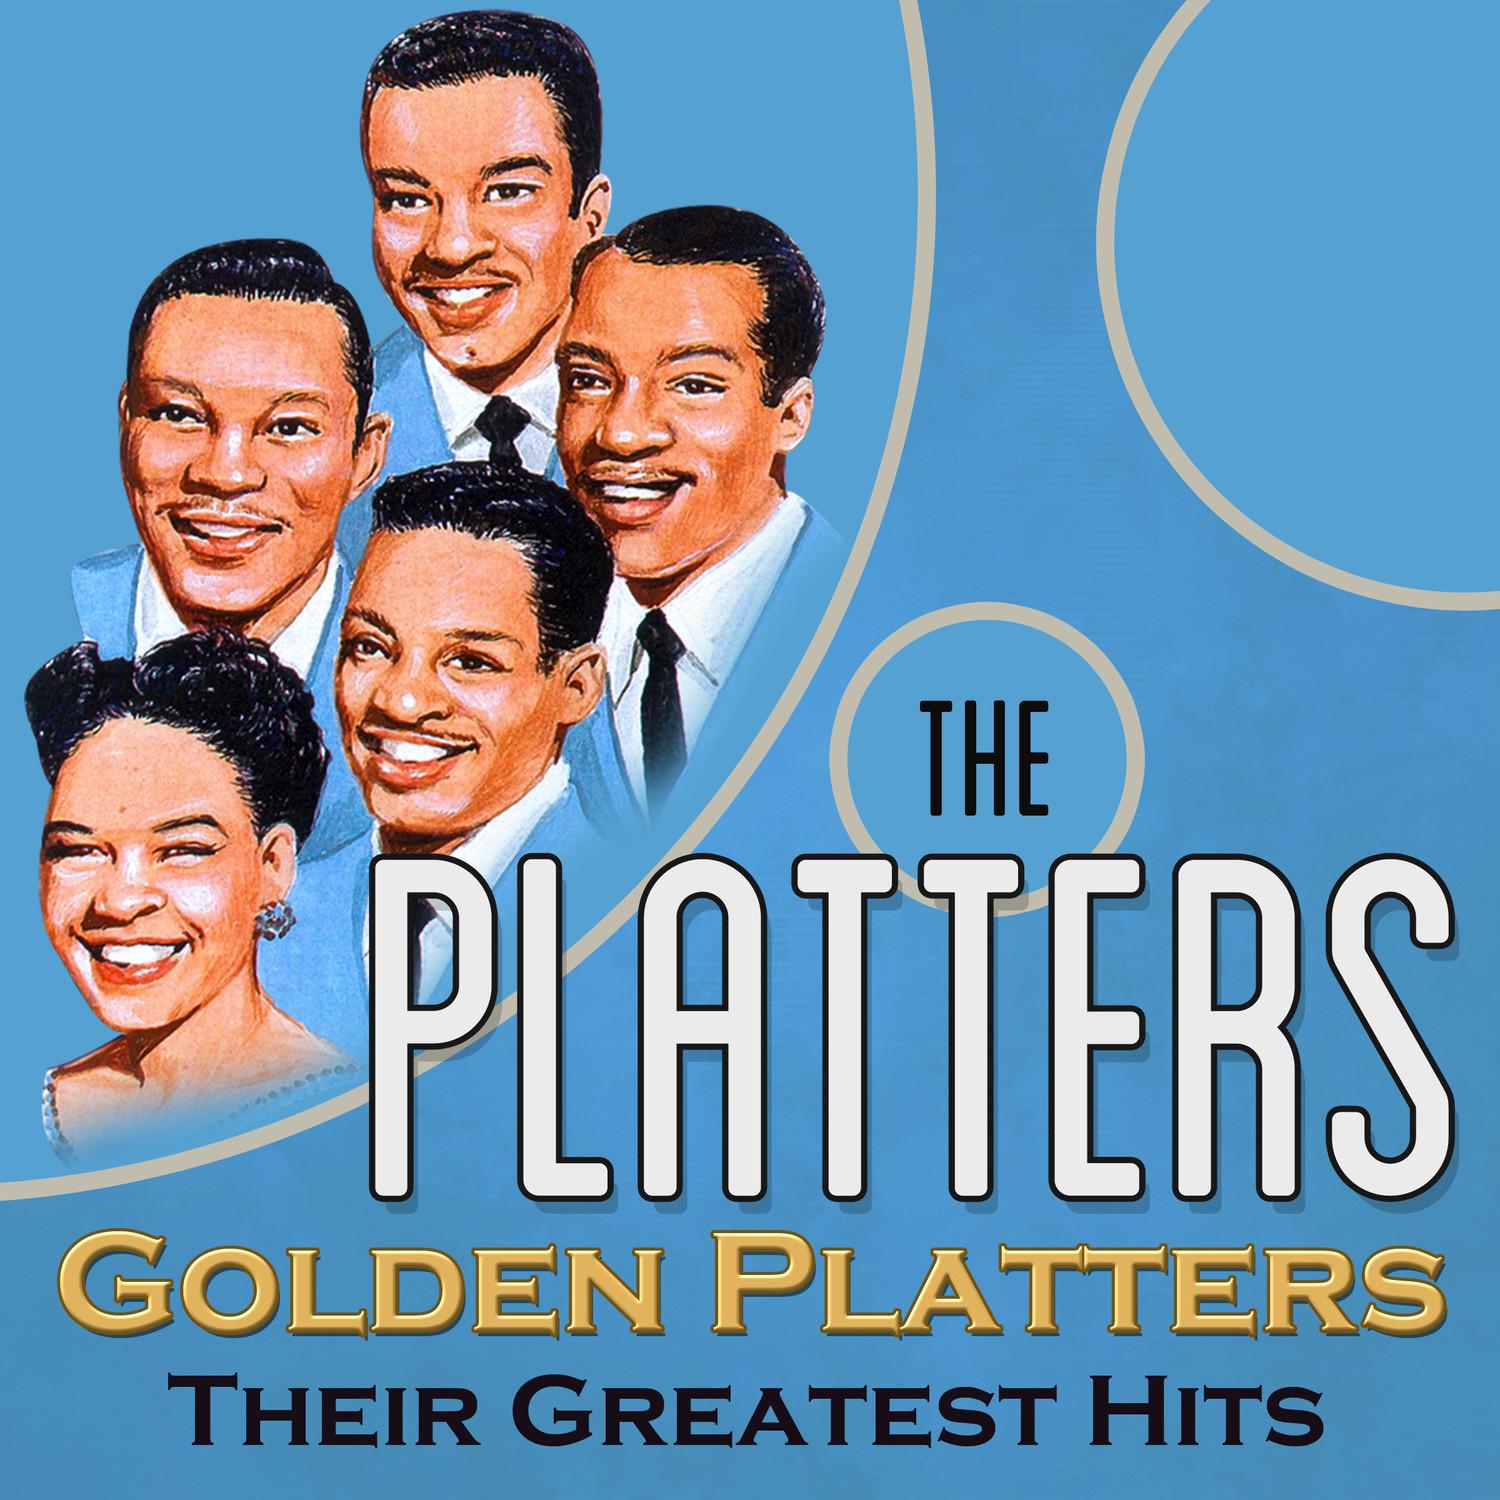 Golden Platters: Their Greatest Hits